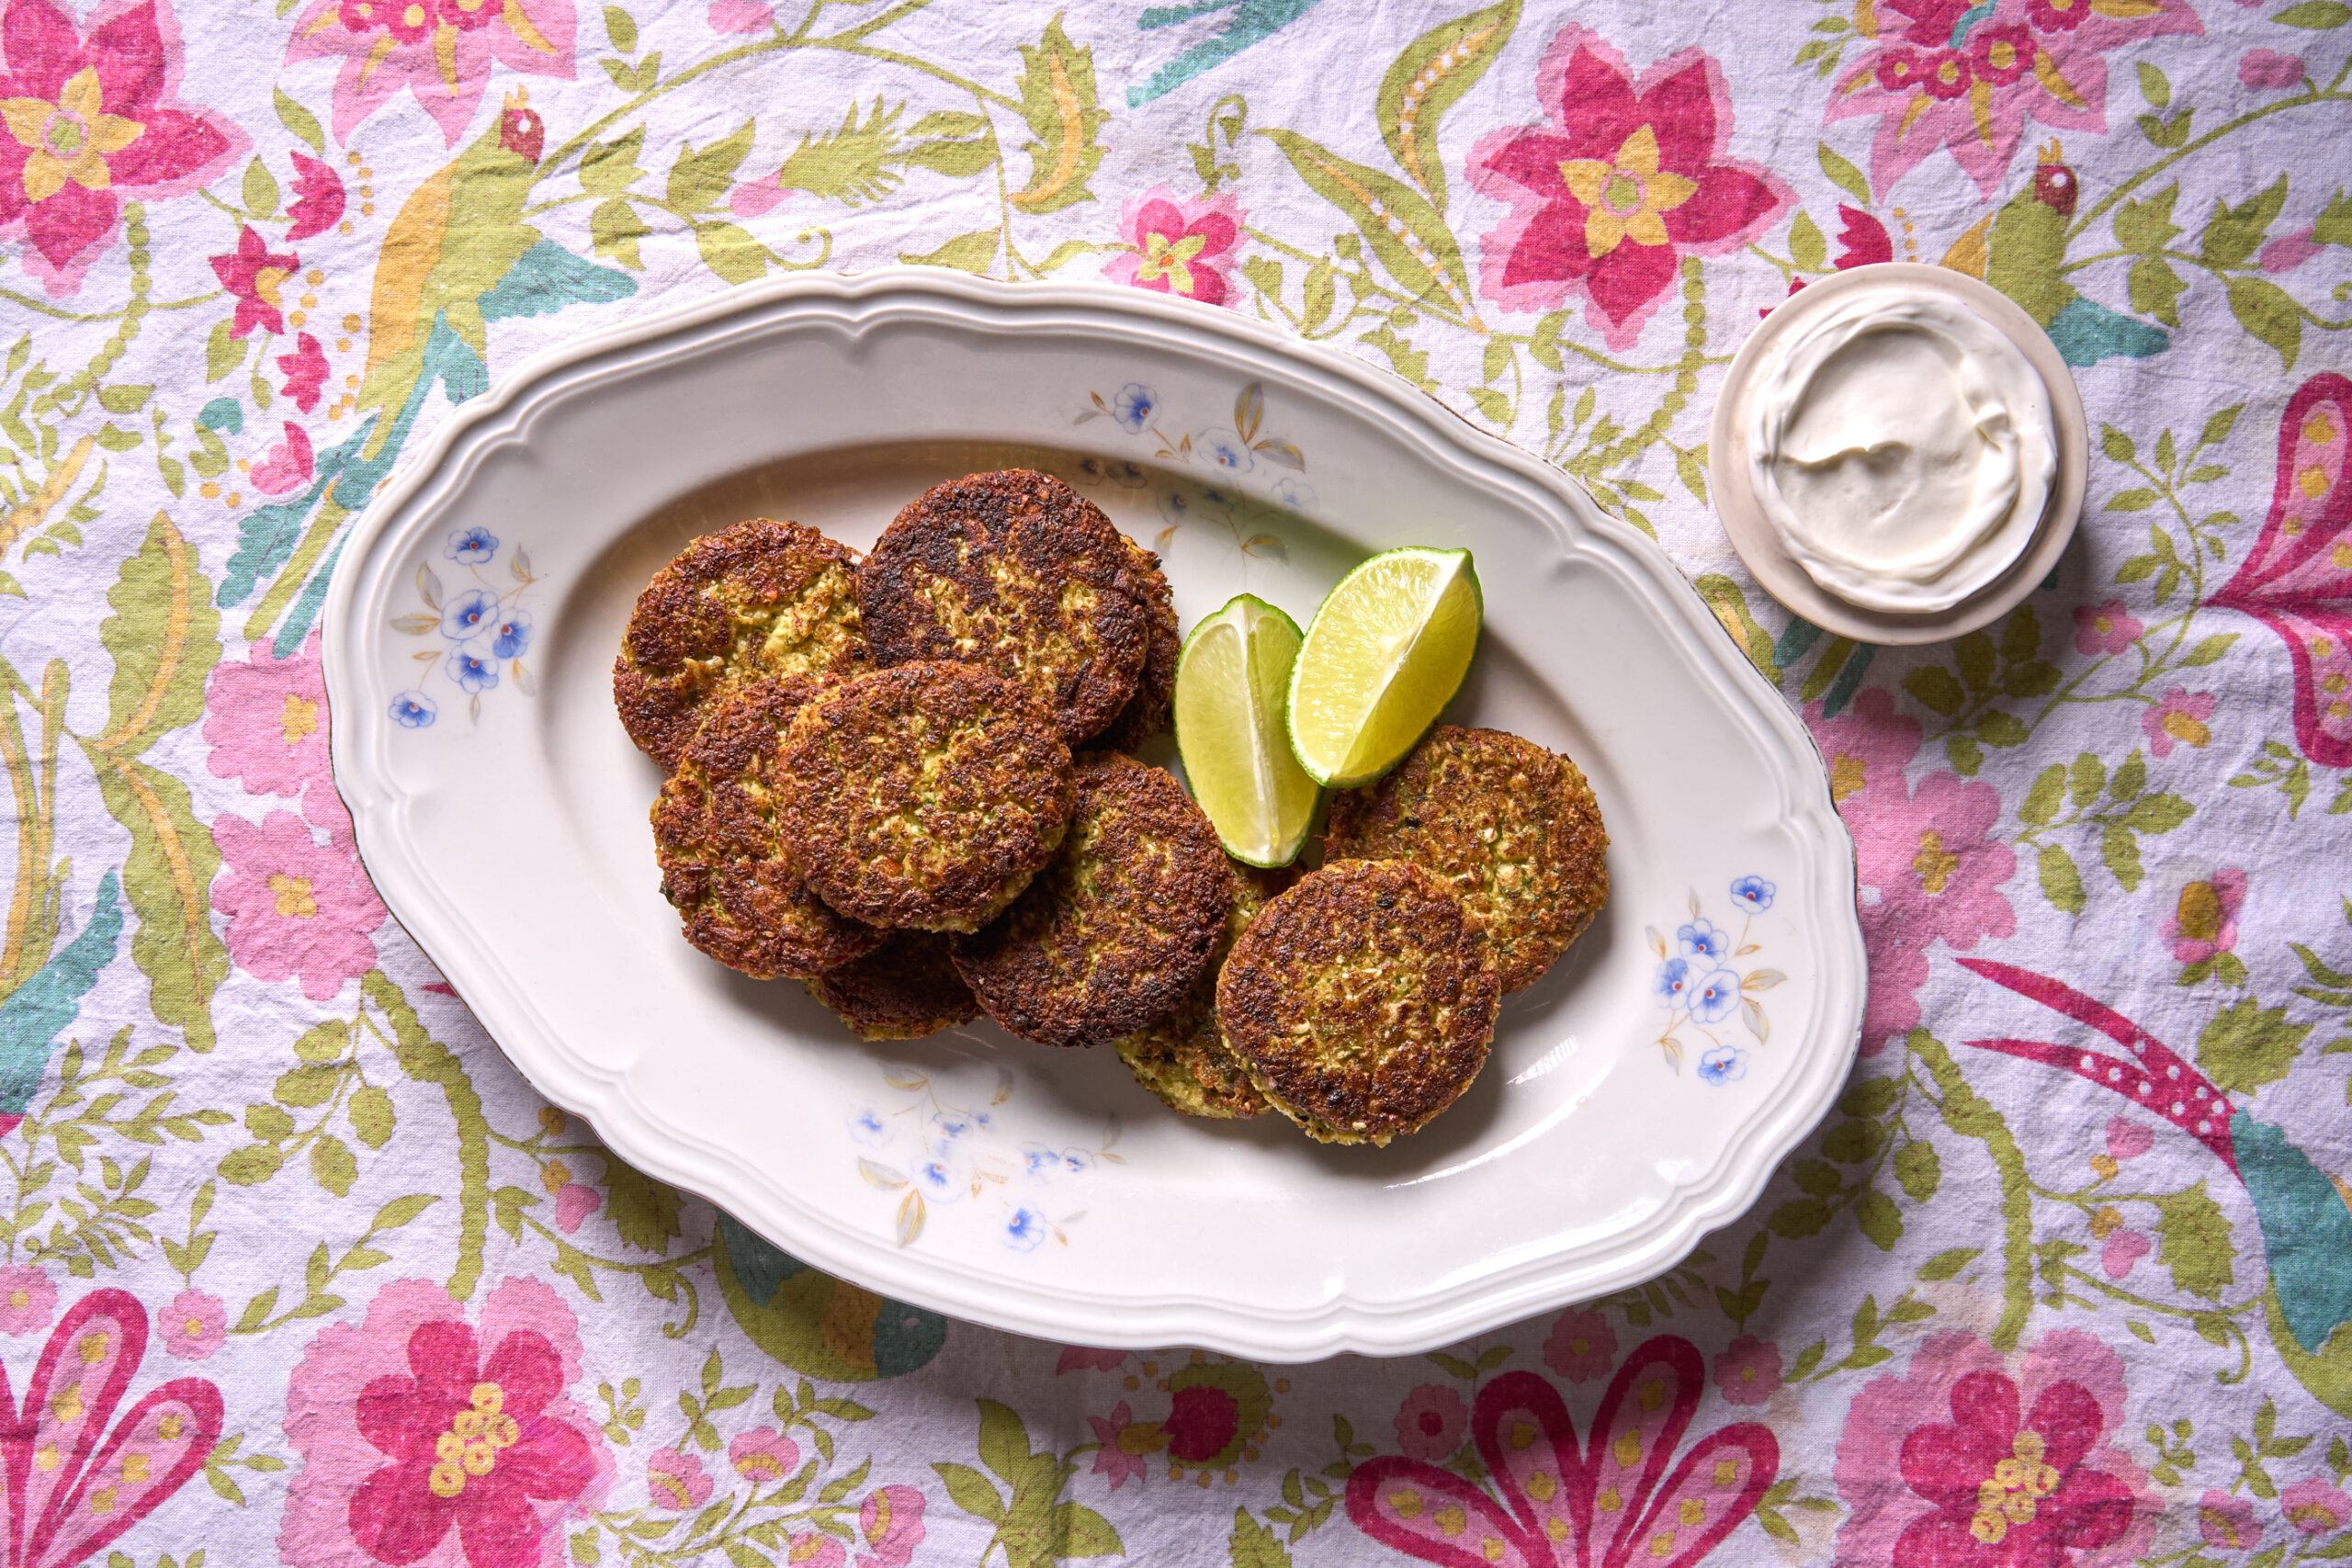 Cauliflower fritters sit on a white oval-shaped platter with blue flower details